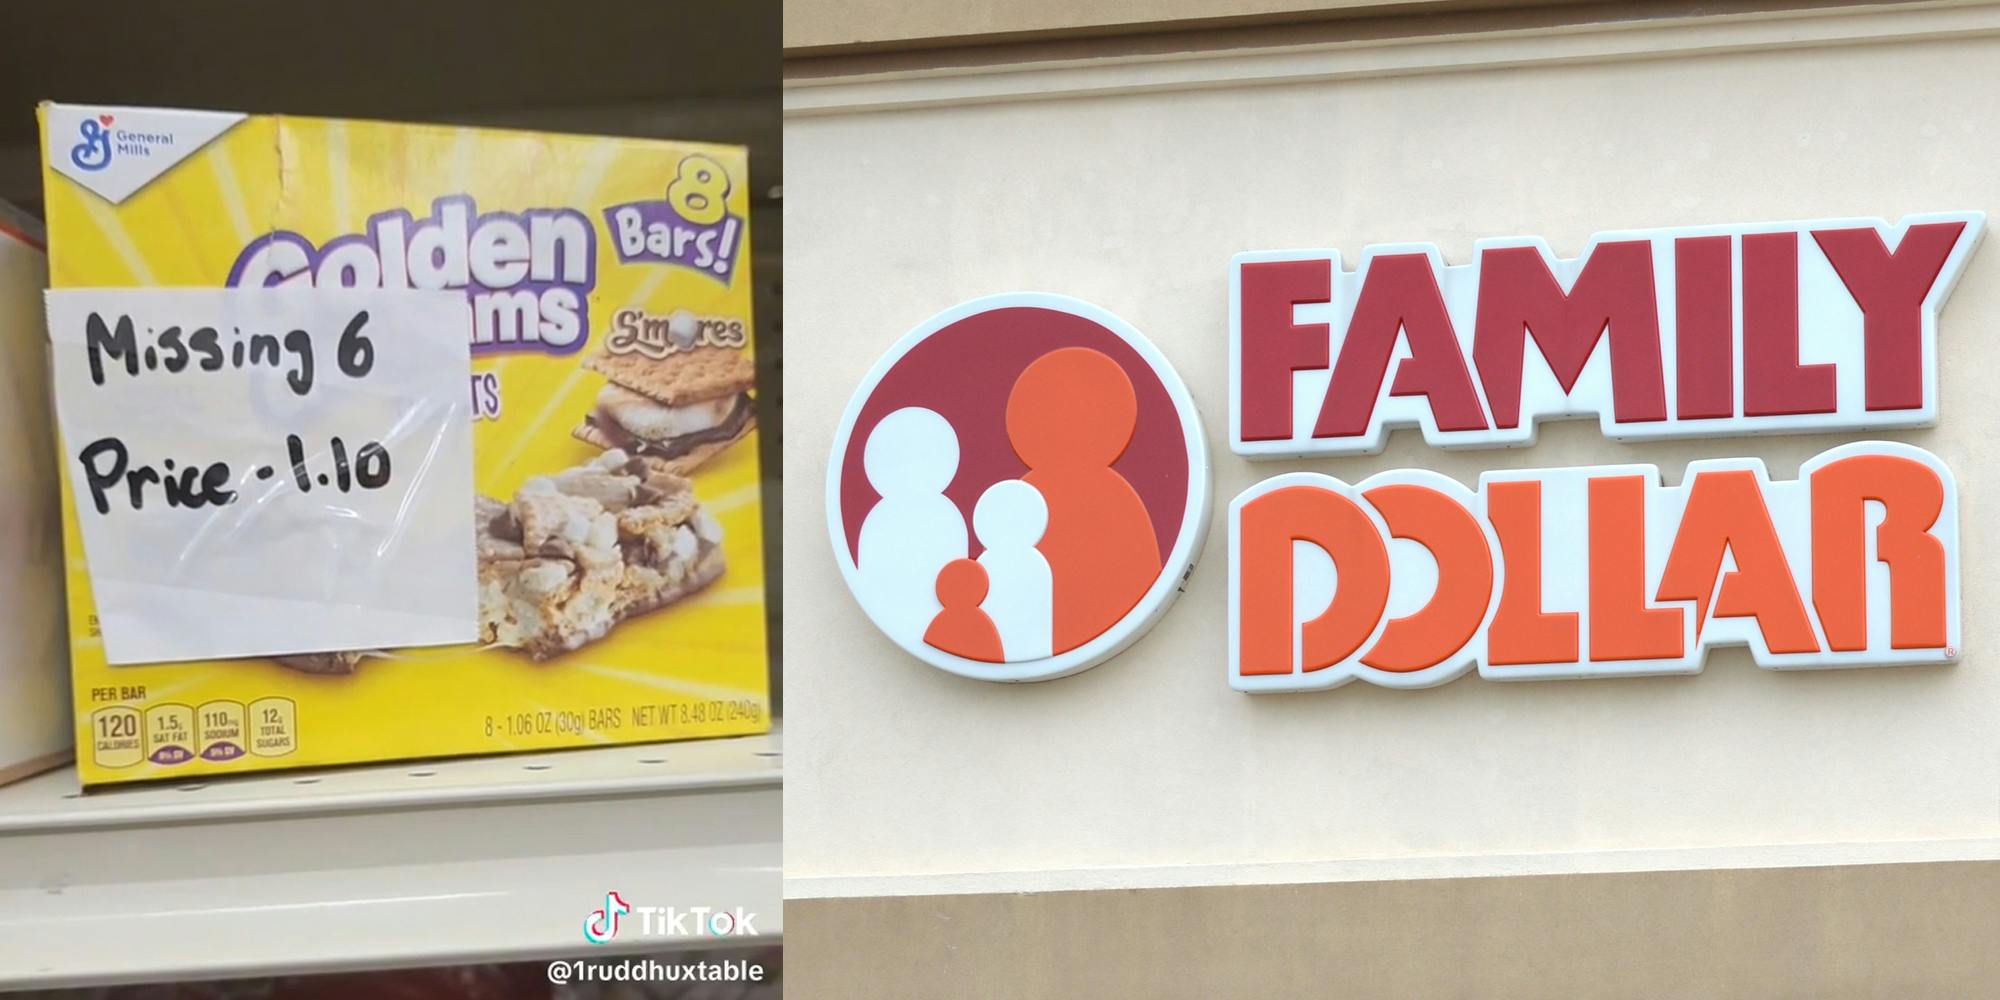 golden grahams bars with taped note that reads "missing 6 price - 1.10" (l) Family Dollar storefront (r)